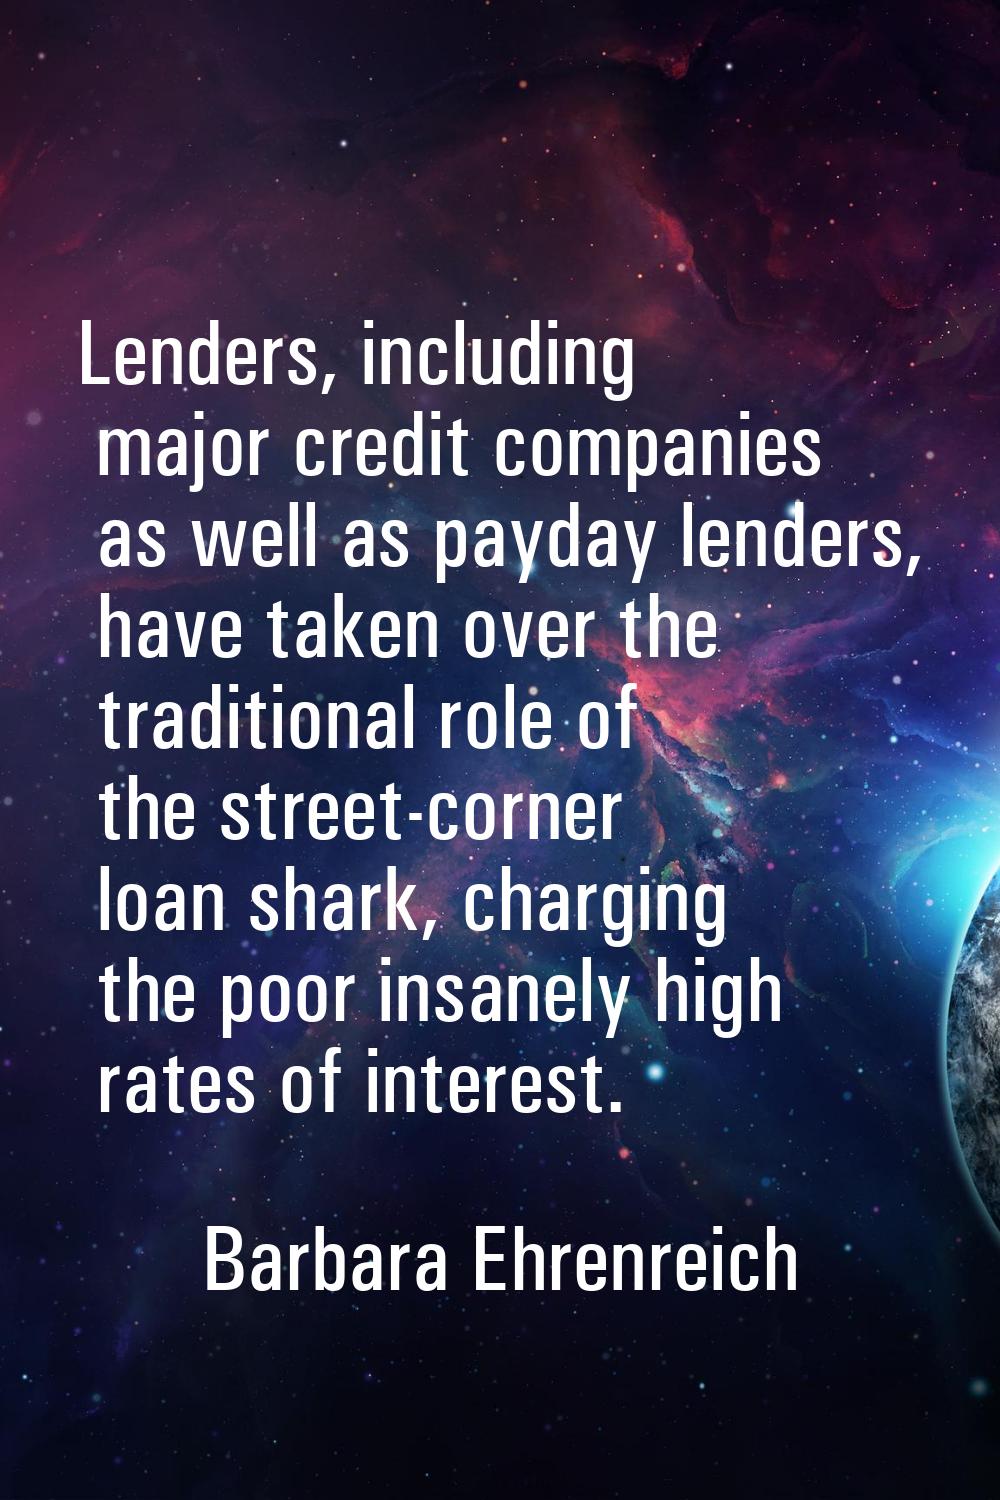 Lenders, including major credit companies as well as payday lenders, have taken over the traditiona